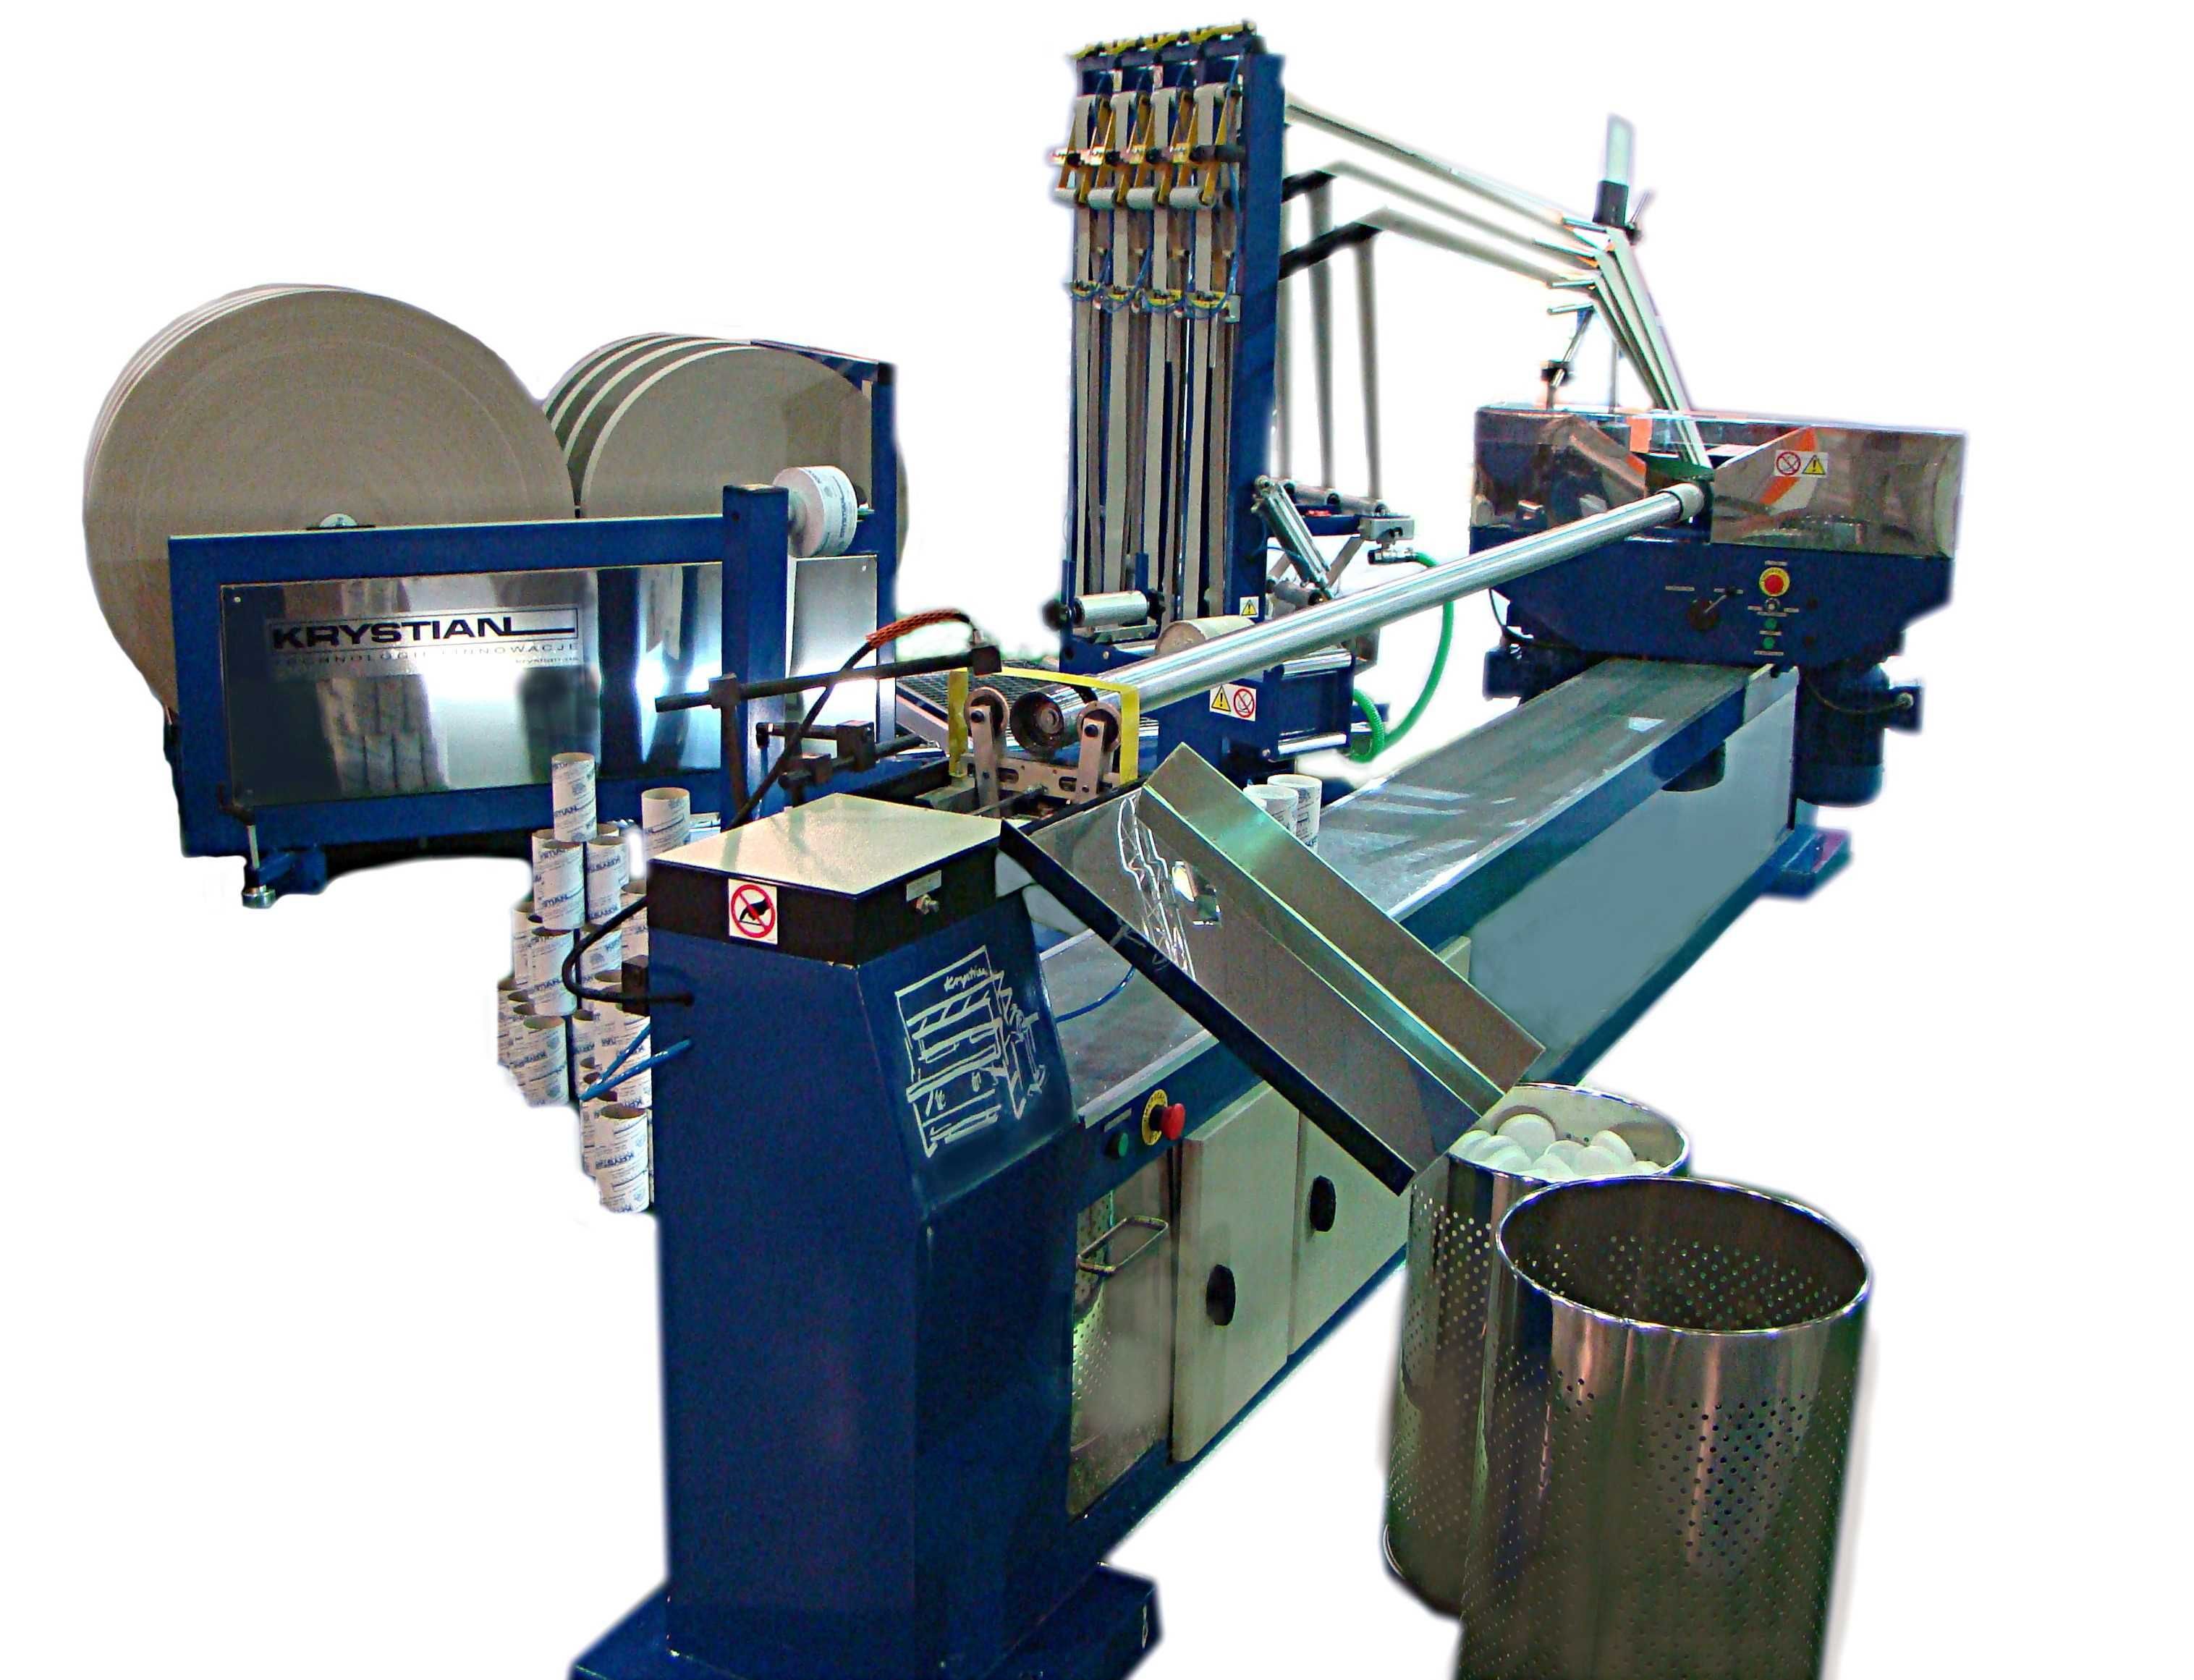 4 web paper core making machine with one cutter